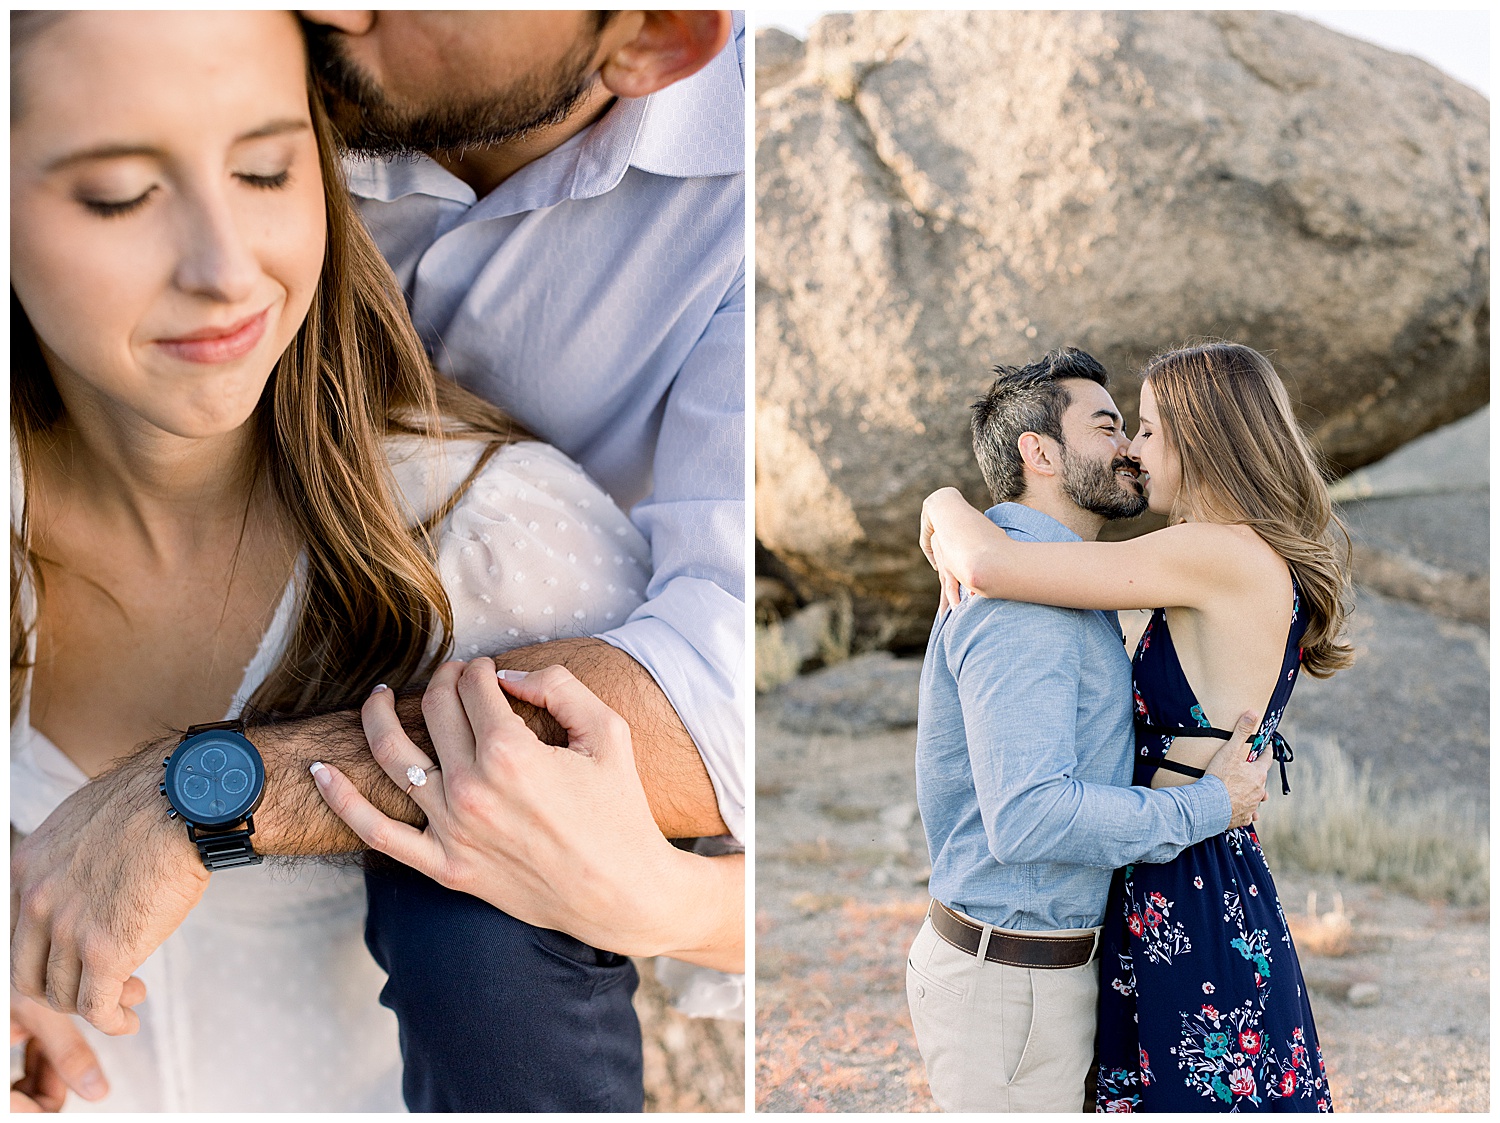 North Scottsdale Engagement session in the boulders of the desert